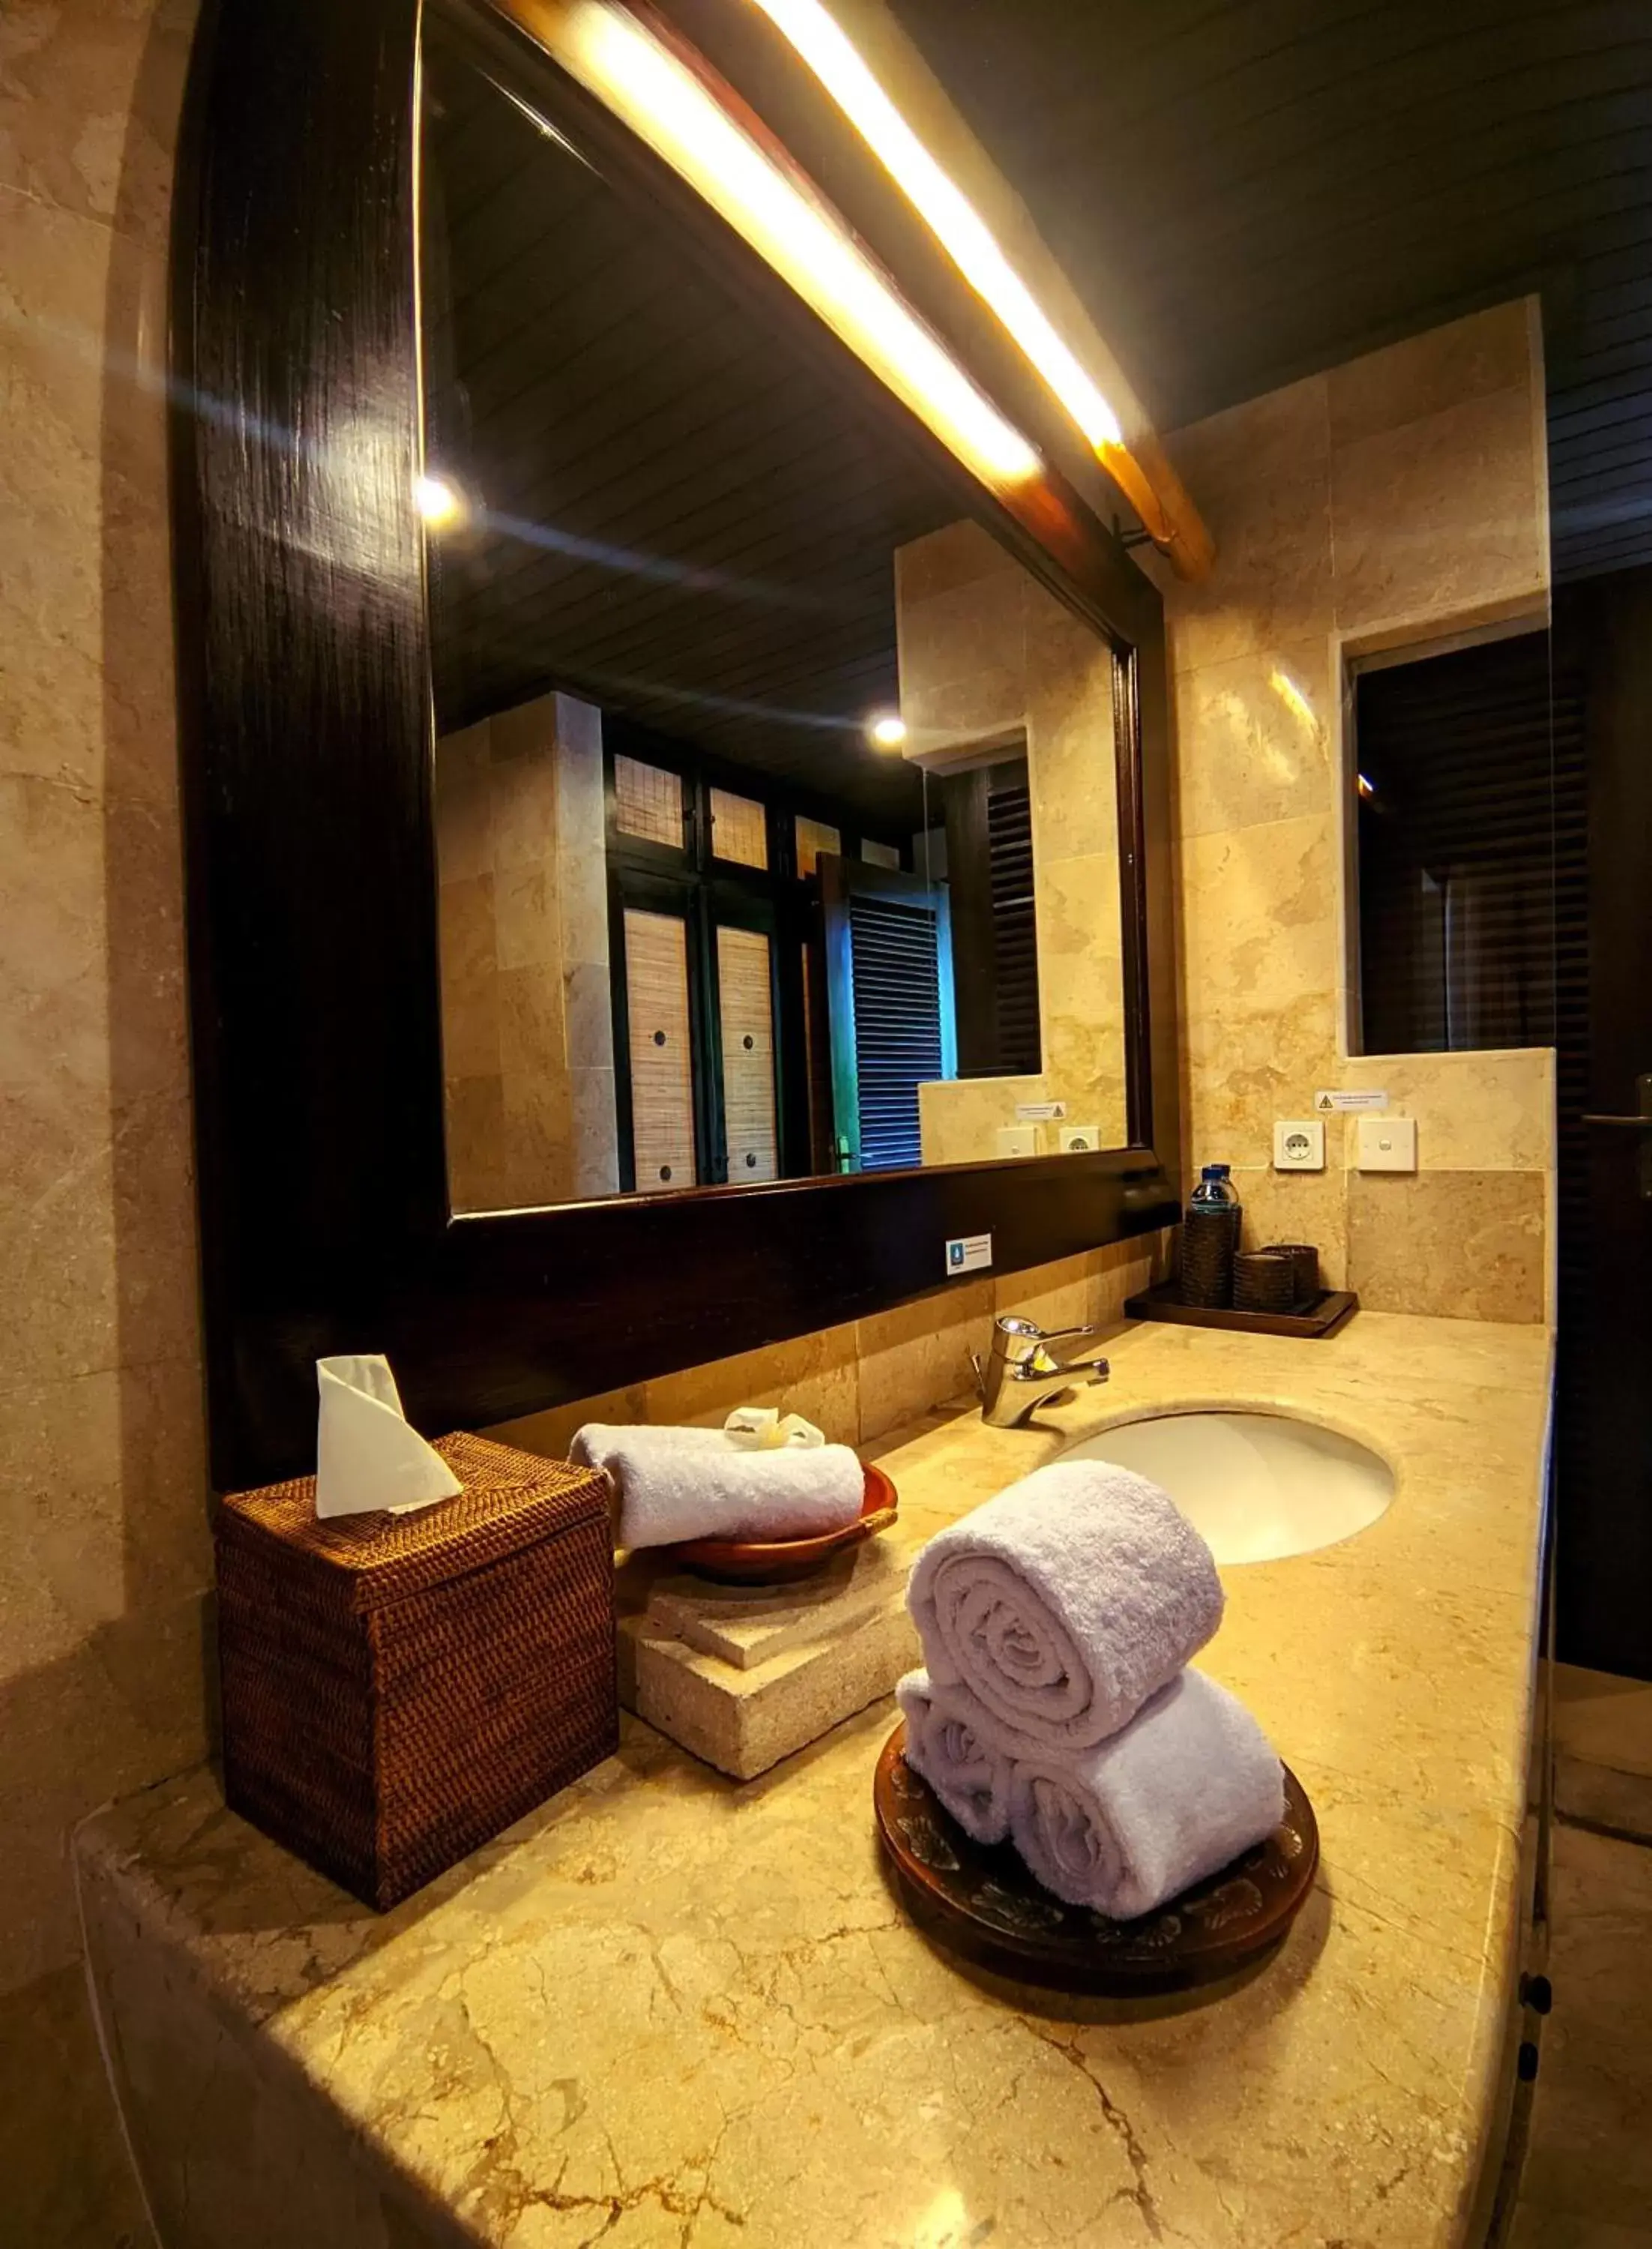 Bathroom in Barong Resort and Spa